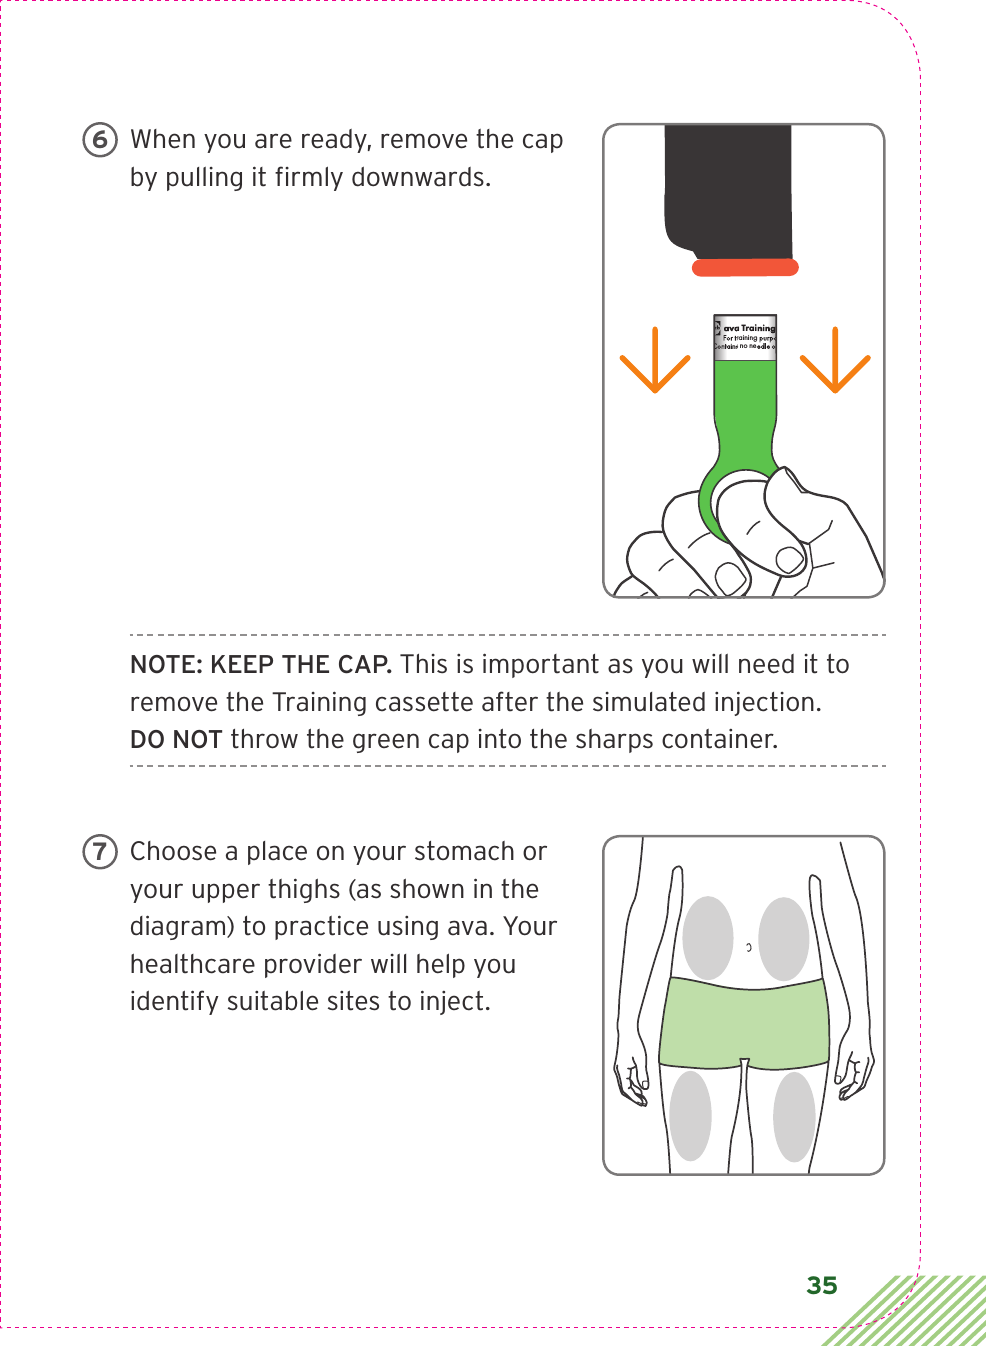 35When you are ready, remove the cap by pulling it ﬁ rmly downwards.NOTE: KEEP THE CAP. This is important as you will need it to remove the Training cassette after the simulated injection. DO NOT throw the green cap into the sharps container.Choose a place on your stomach or your upper thighs (as shown in the diagram) to practice using ava. Your healthcare provider will help you identify suitable sites to inject. ava Training CassetteFor training purposes only.Contains no needle or medication.CIA79968ALBL4_CIM_PS6ava Training CassetteFor training purposes only.Contains no needle or medication.ava Training CassetteFor training purposes only.Contains no needle or medication.   67